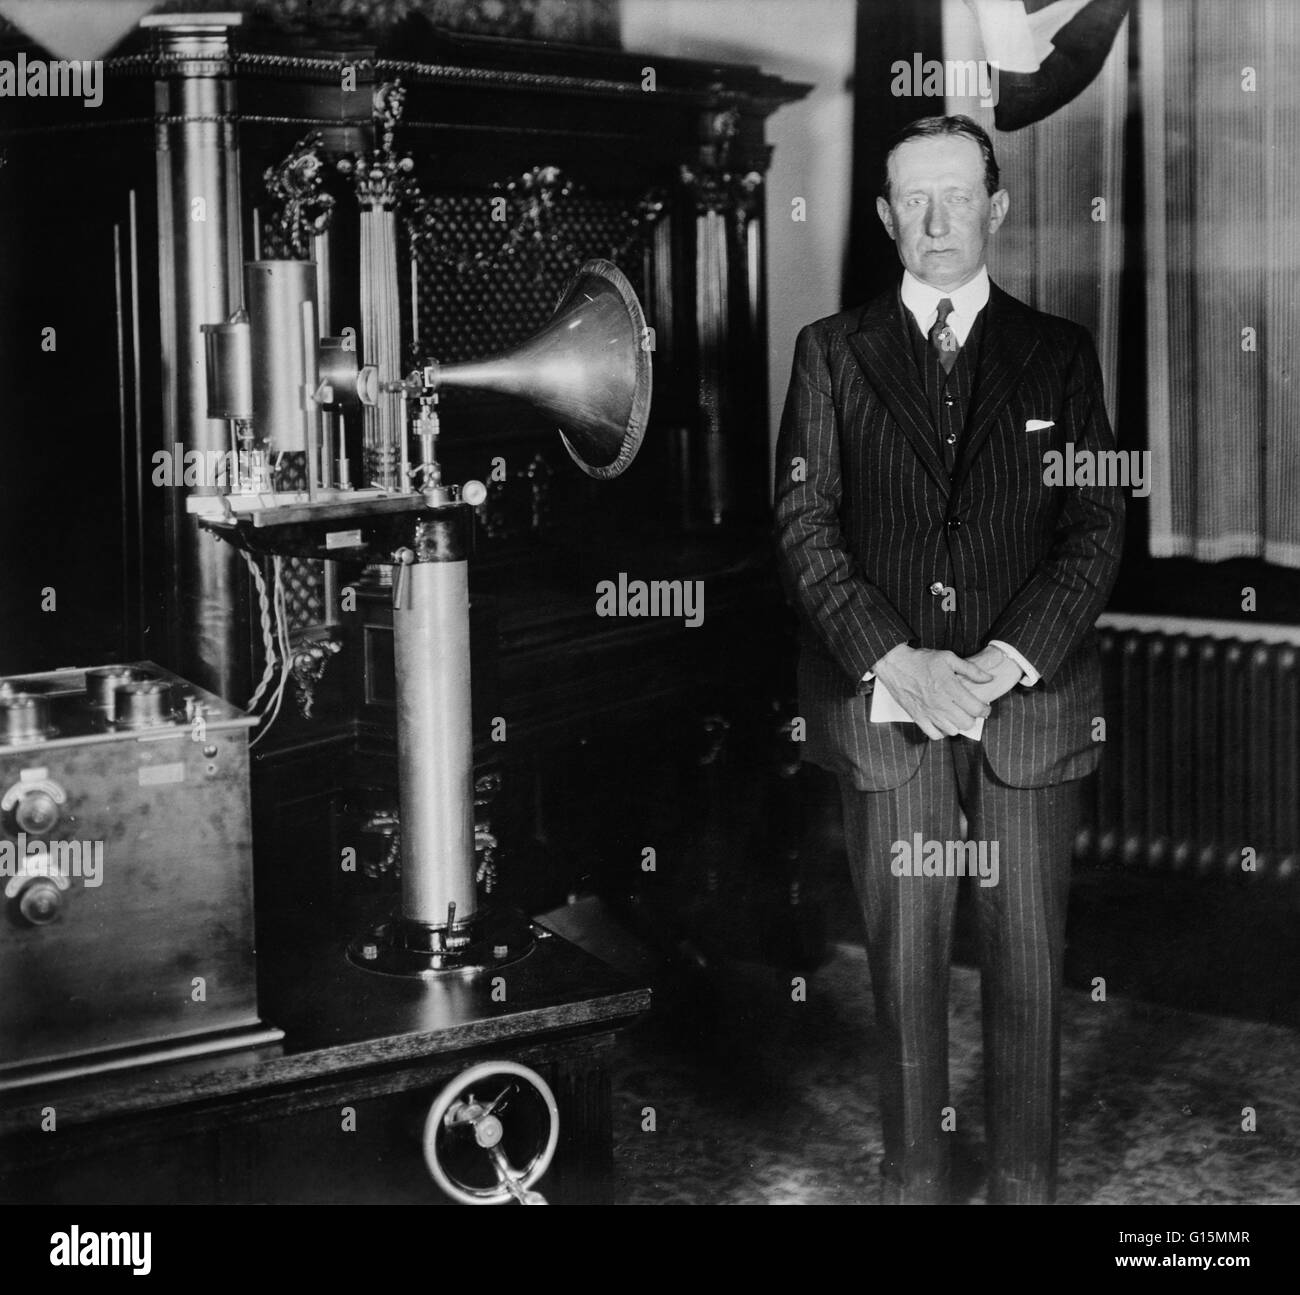 Guglielmo Marconi (April 25, 1874 - July 20 1937) was an Italian inventor, known as the father of long distance radio transmission and for his development of Marconi's law and a radio telegraph system. Marconi is often credited as the inventor of radio, a Stock Photo